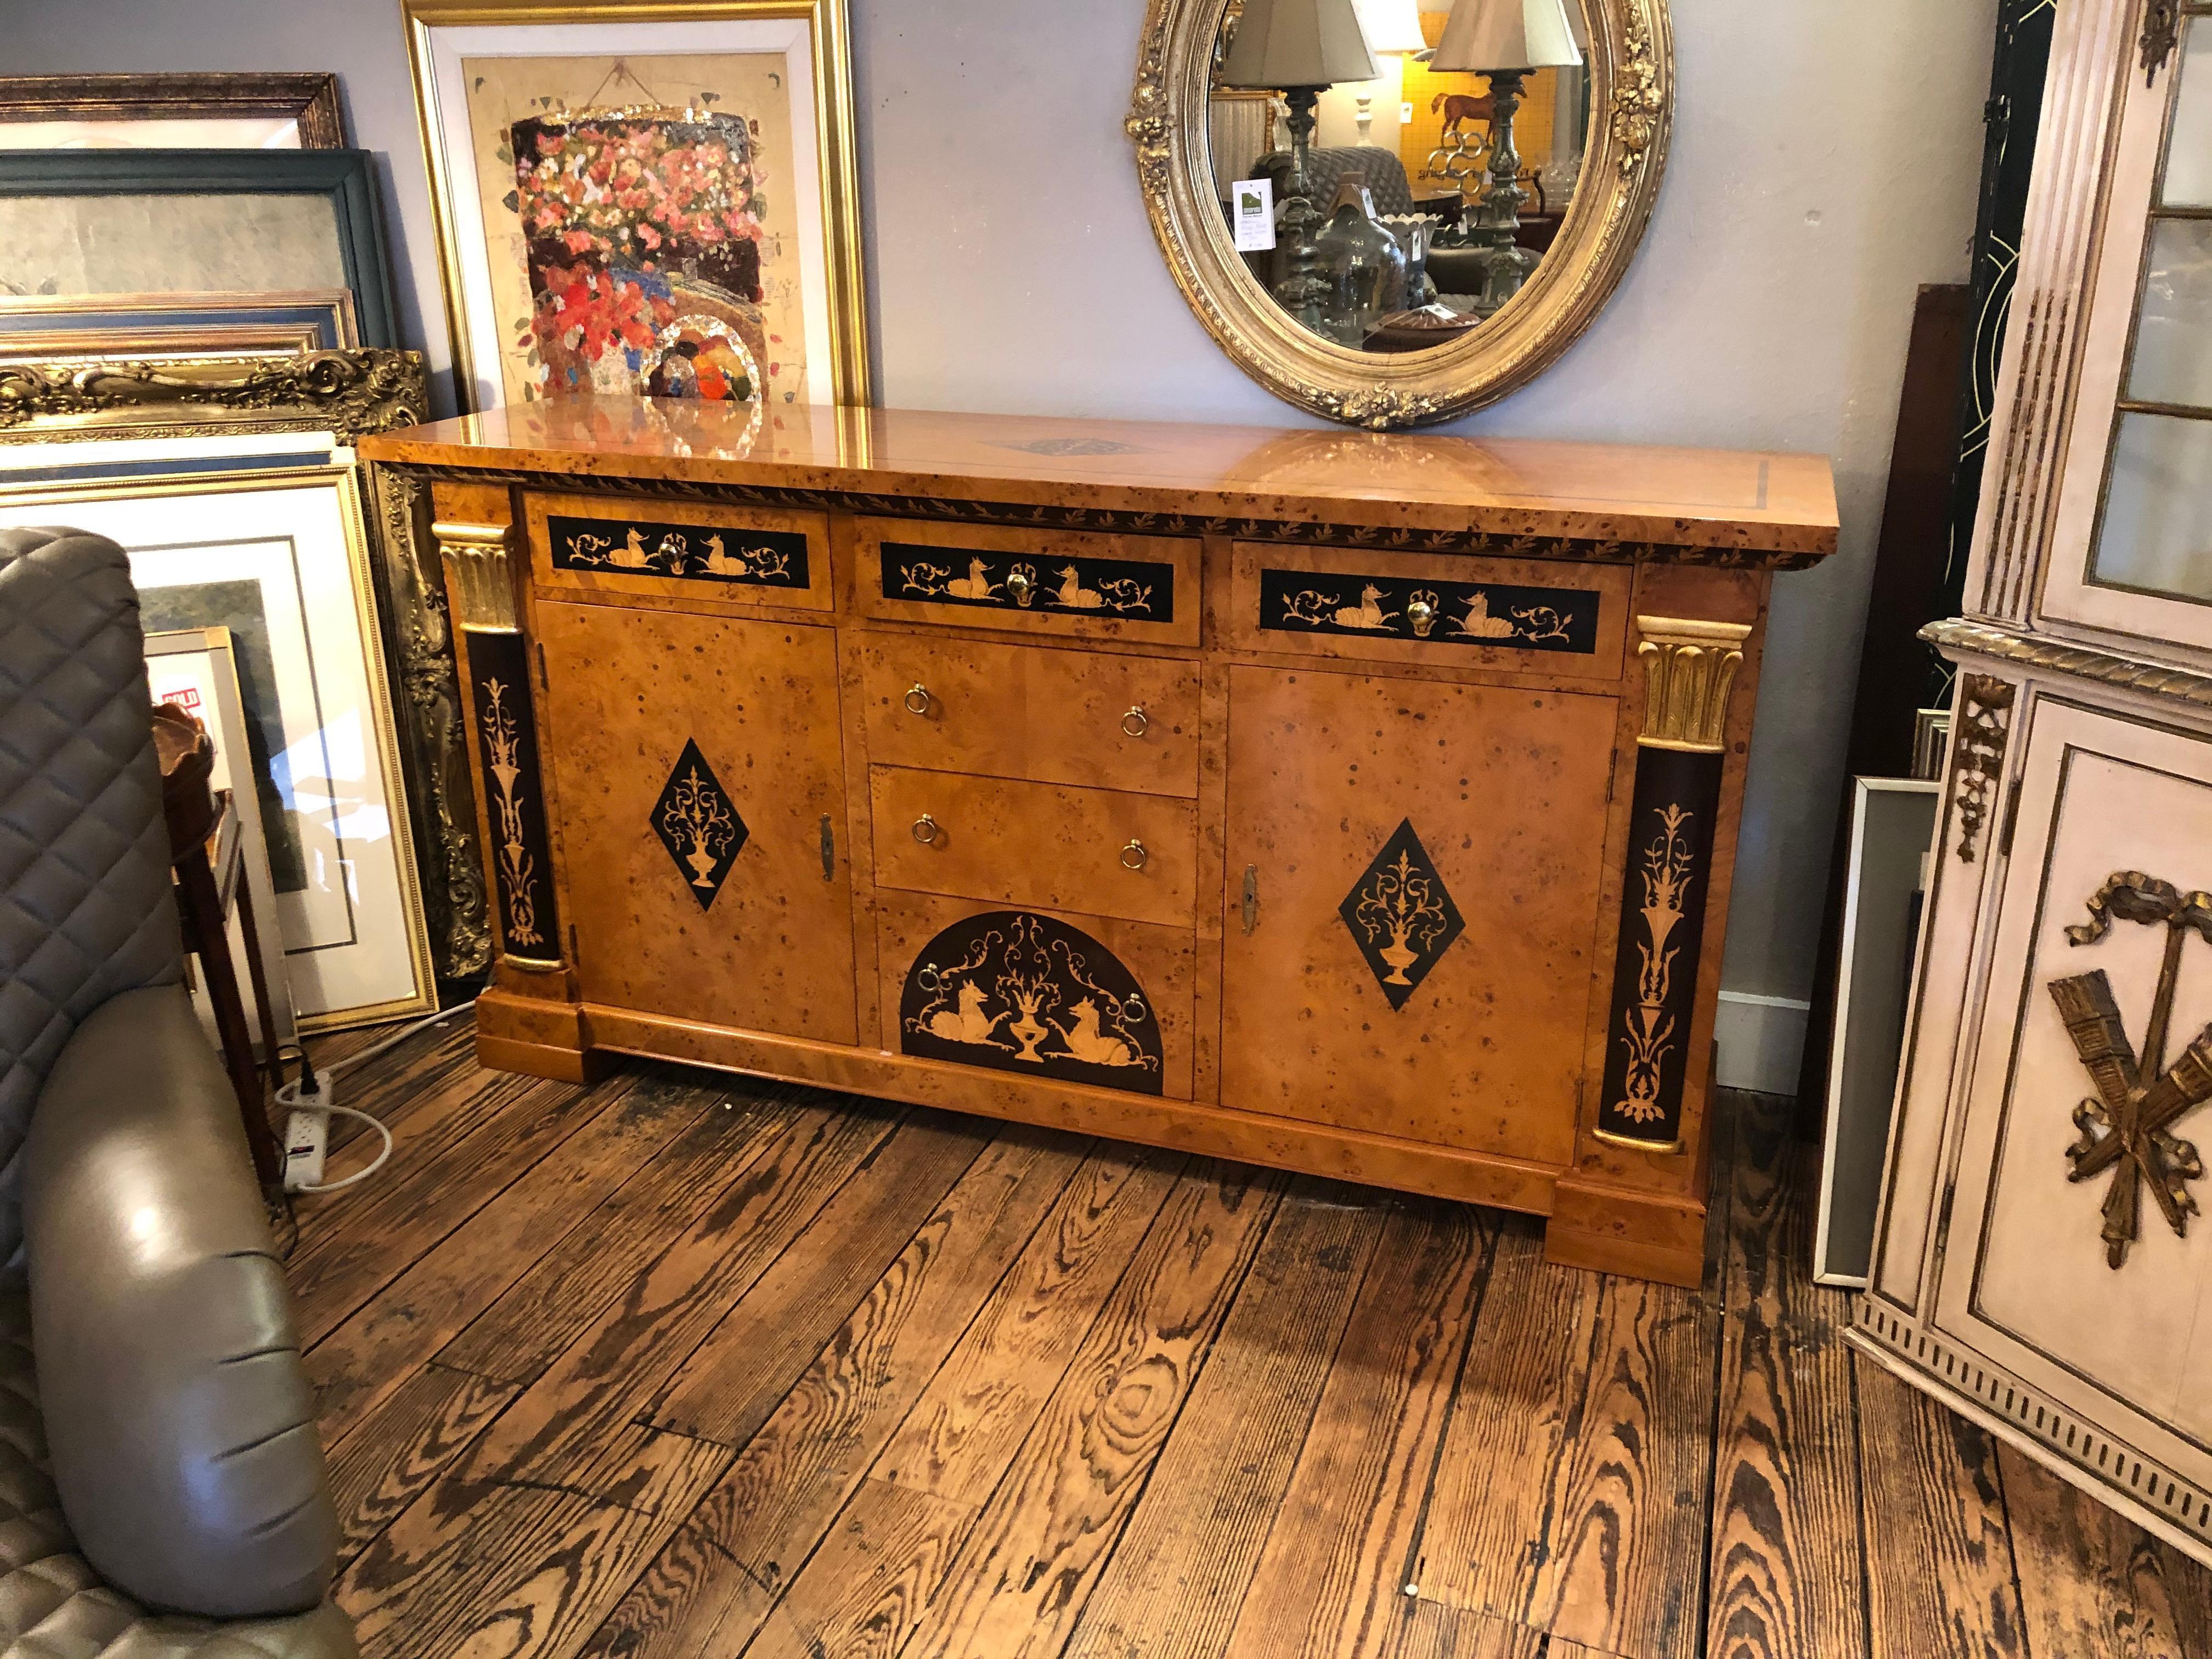 Francesco Molon ornately inlaid Italian neoclassical style or Empire credenza buffet cabinet. The mix of blonde honey colored burled wood and ebonized inlay is reminiscent of Biedermeier. The company was established over forty years ago in Romano